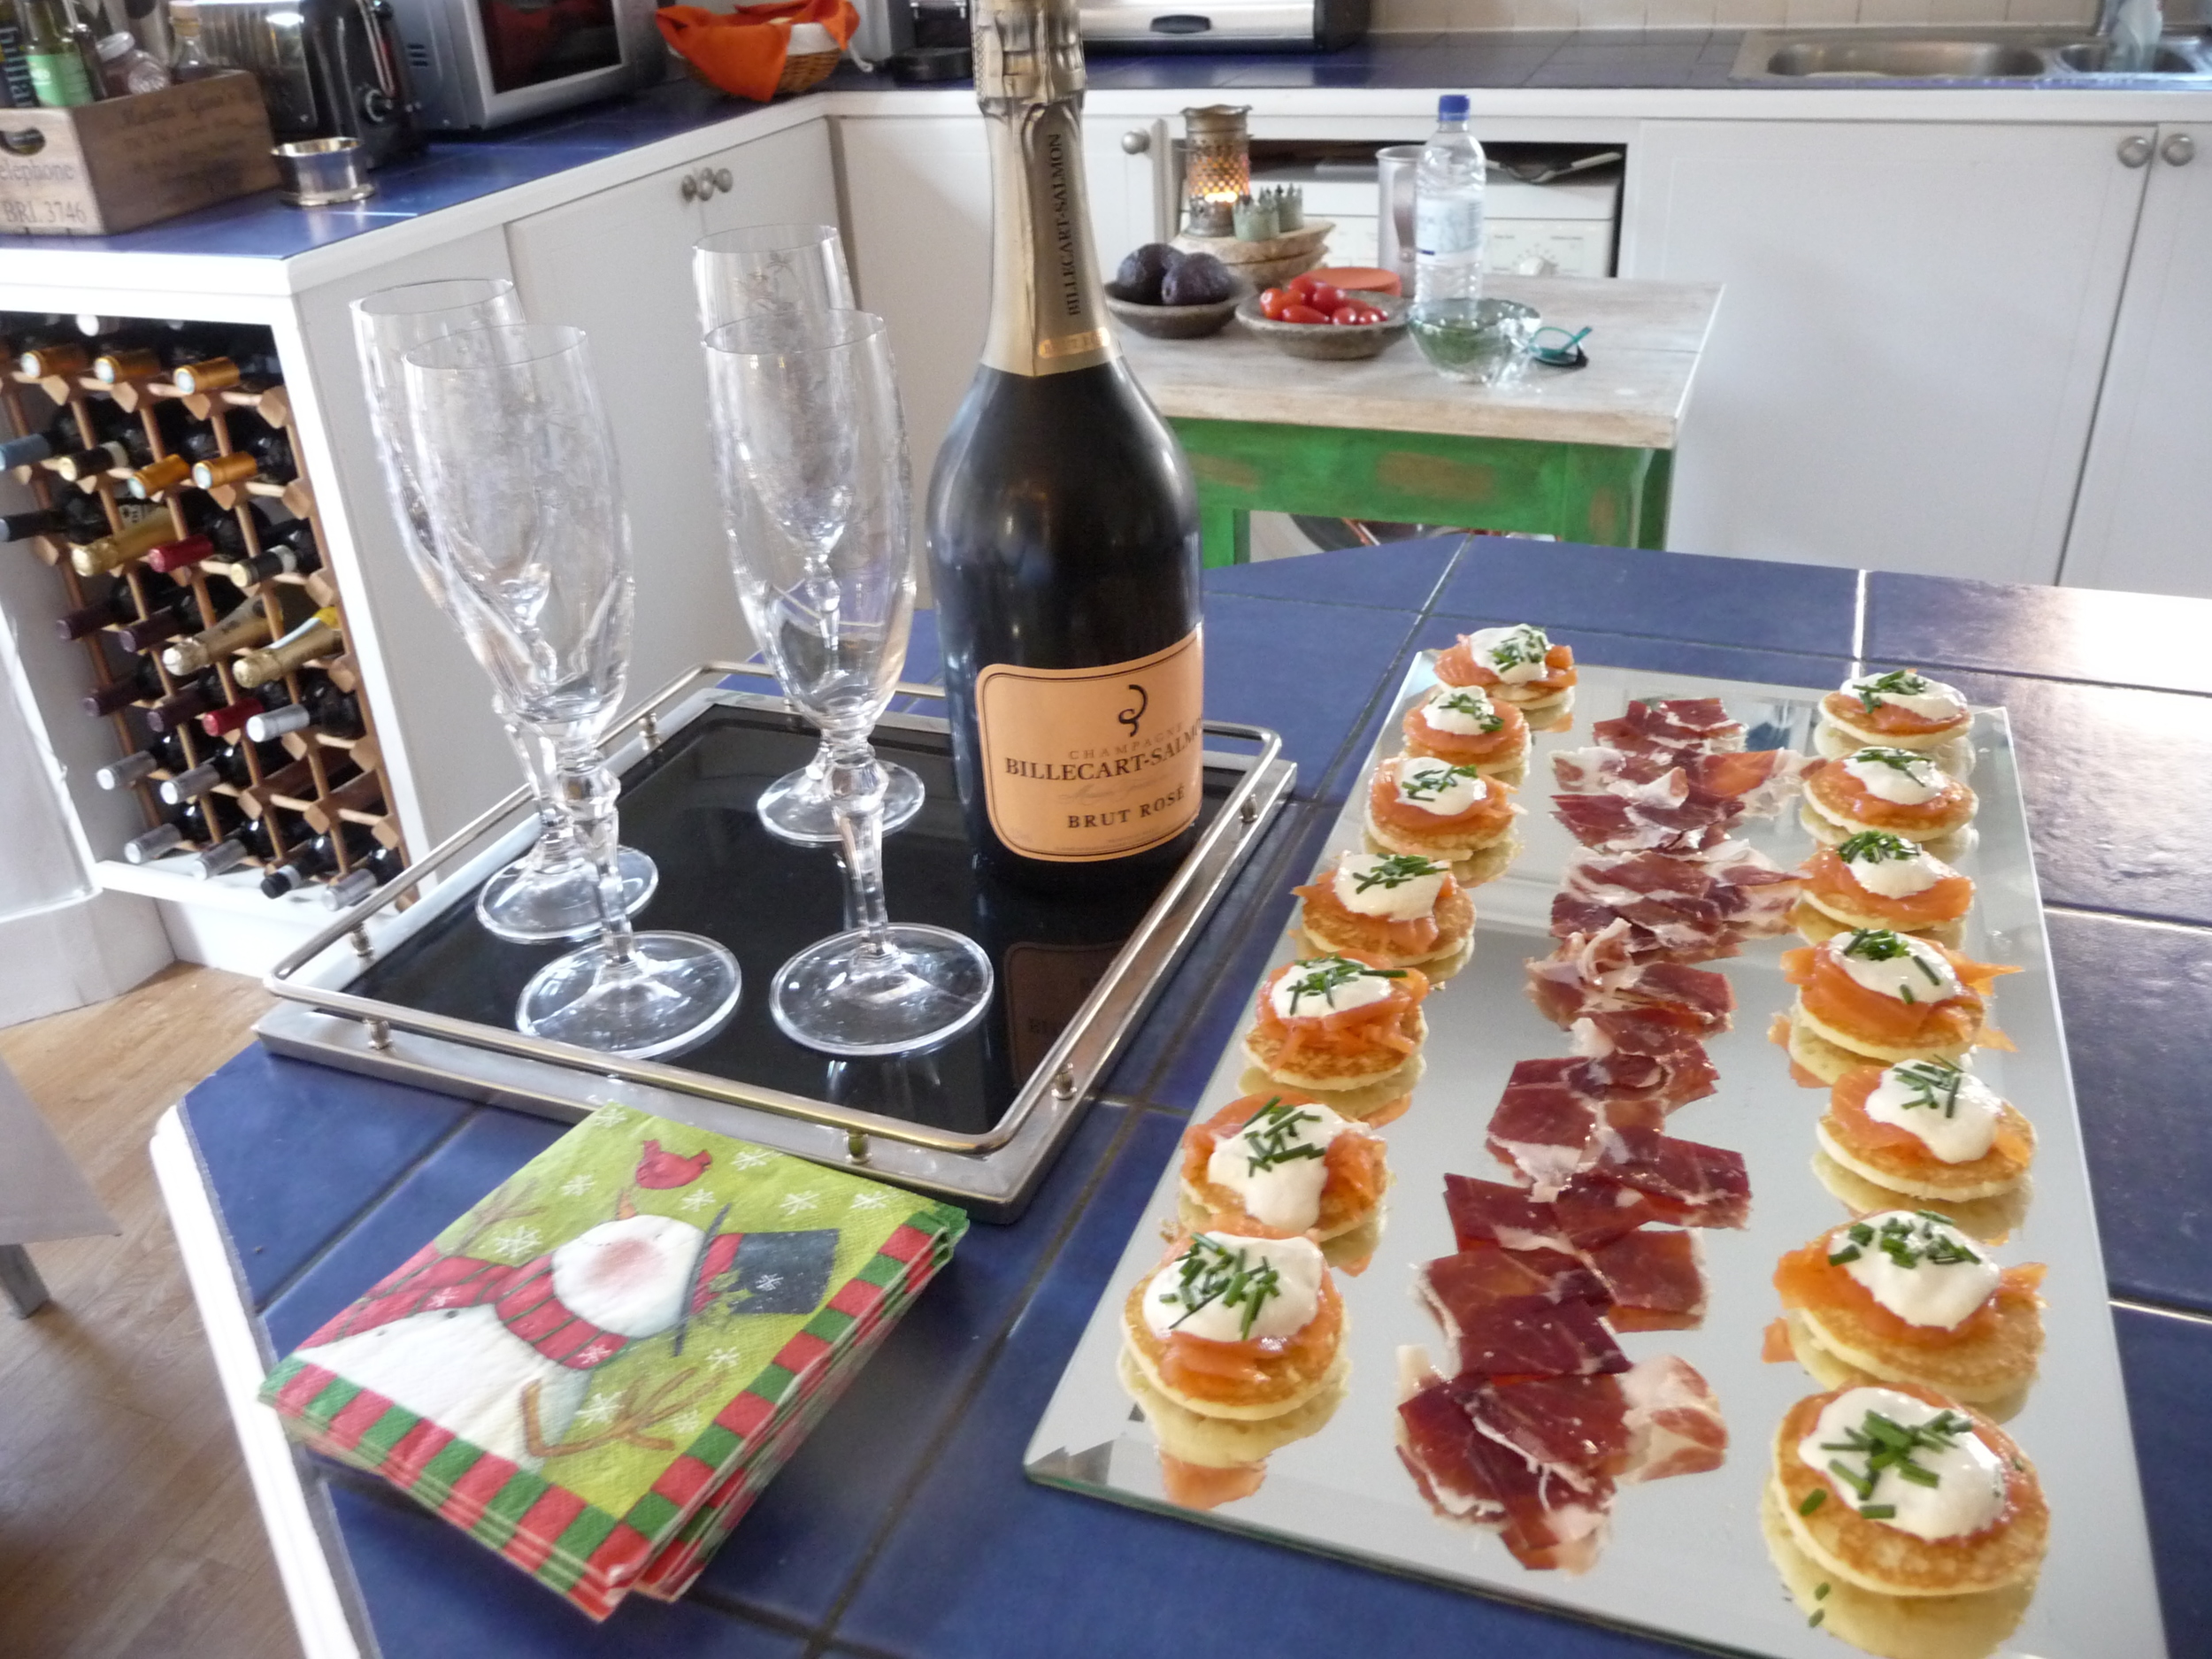  Smoked salmon blinis and Iberico ham with Billecart Salmon Rose champagne at noon 